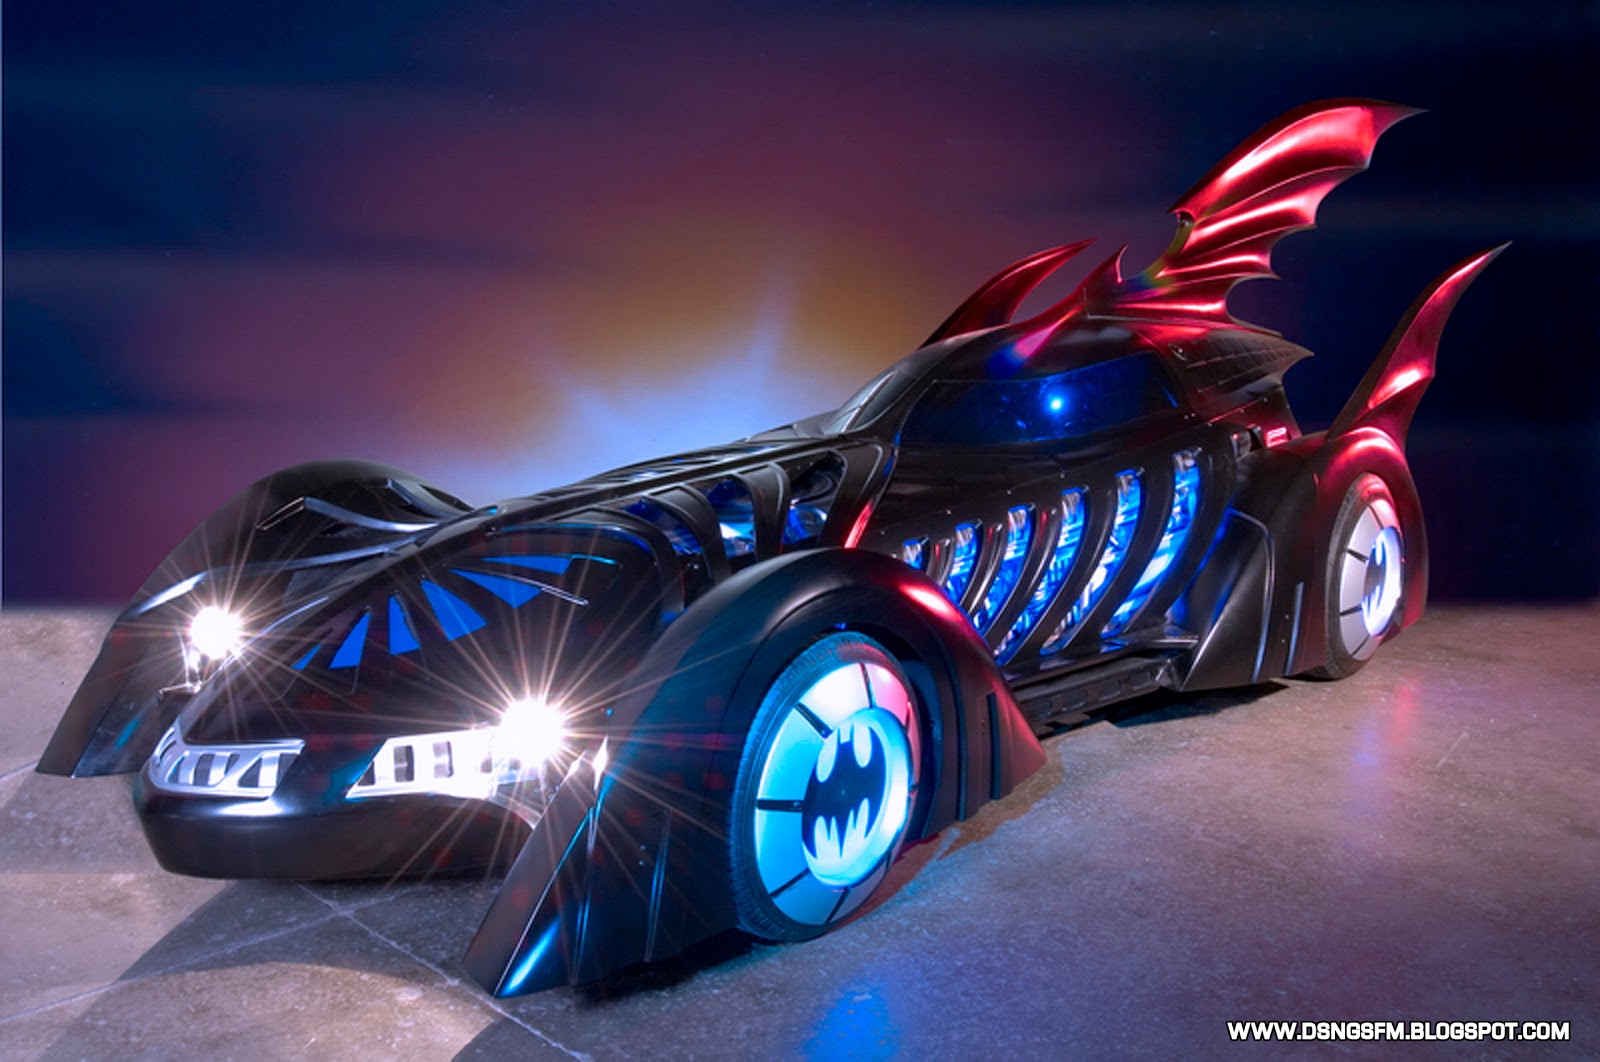 DSNGS SCI FI MEGAVERSE  REAL LIFE NISSAN BATMOBILE  PLUS OTHER